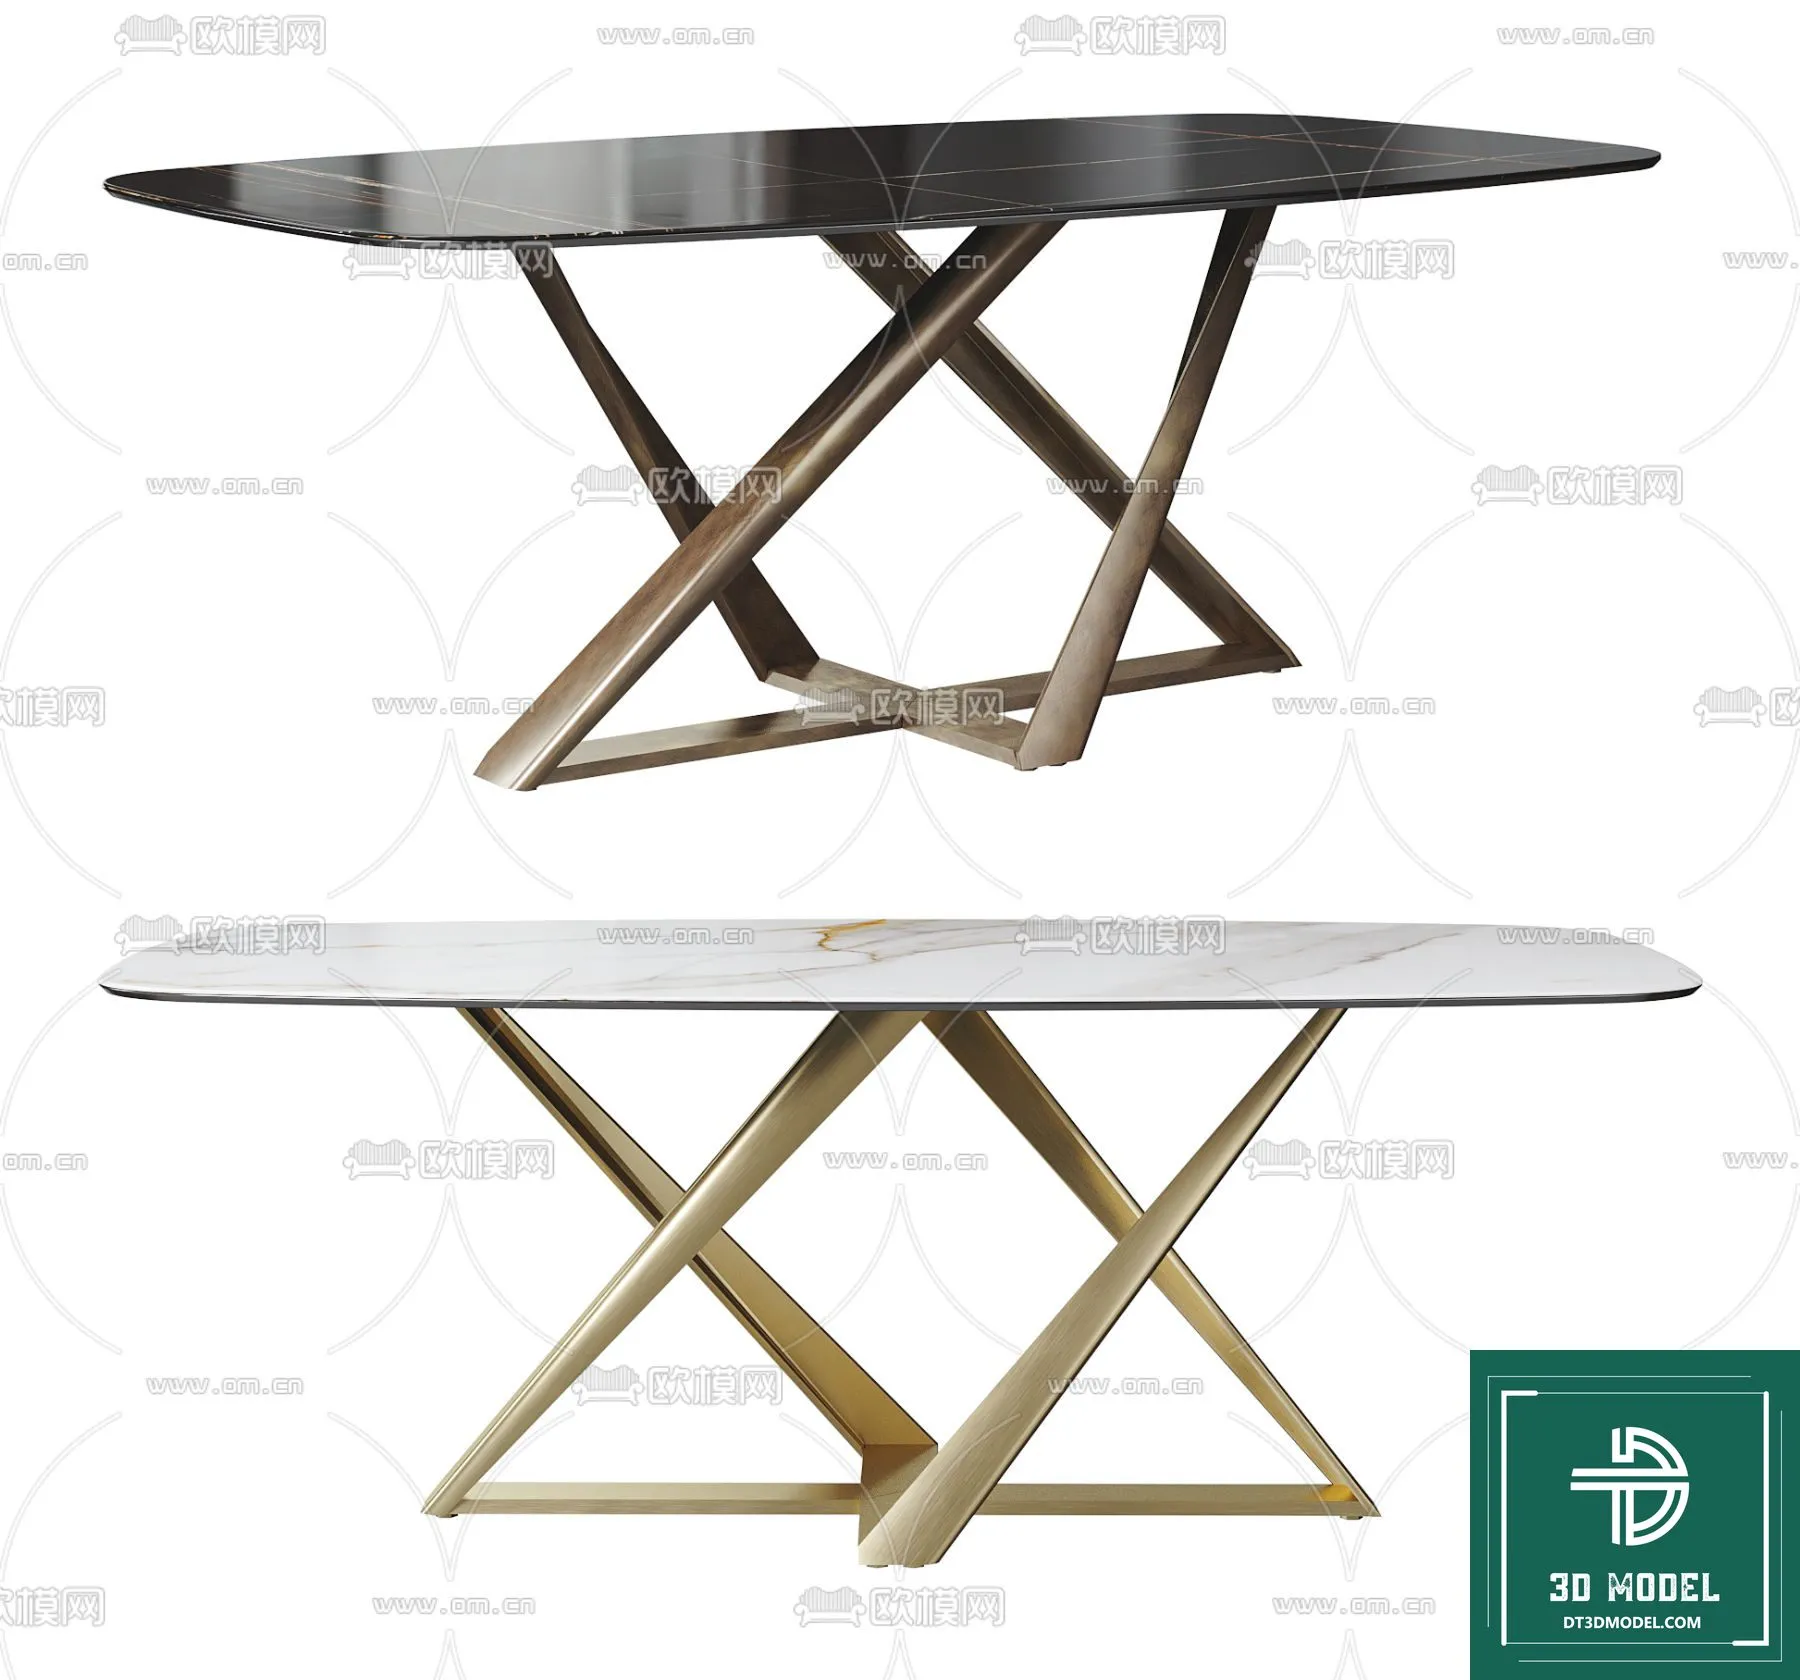 LUXURY – 3D Models – DINING TABLE SETS – 030